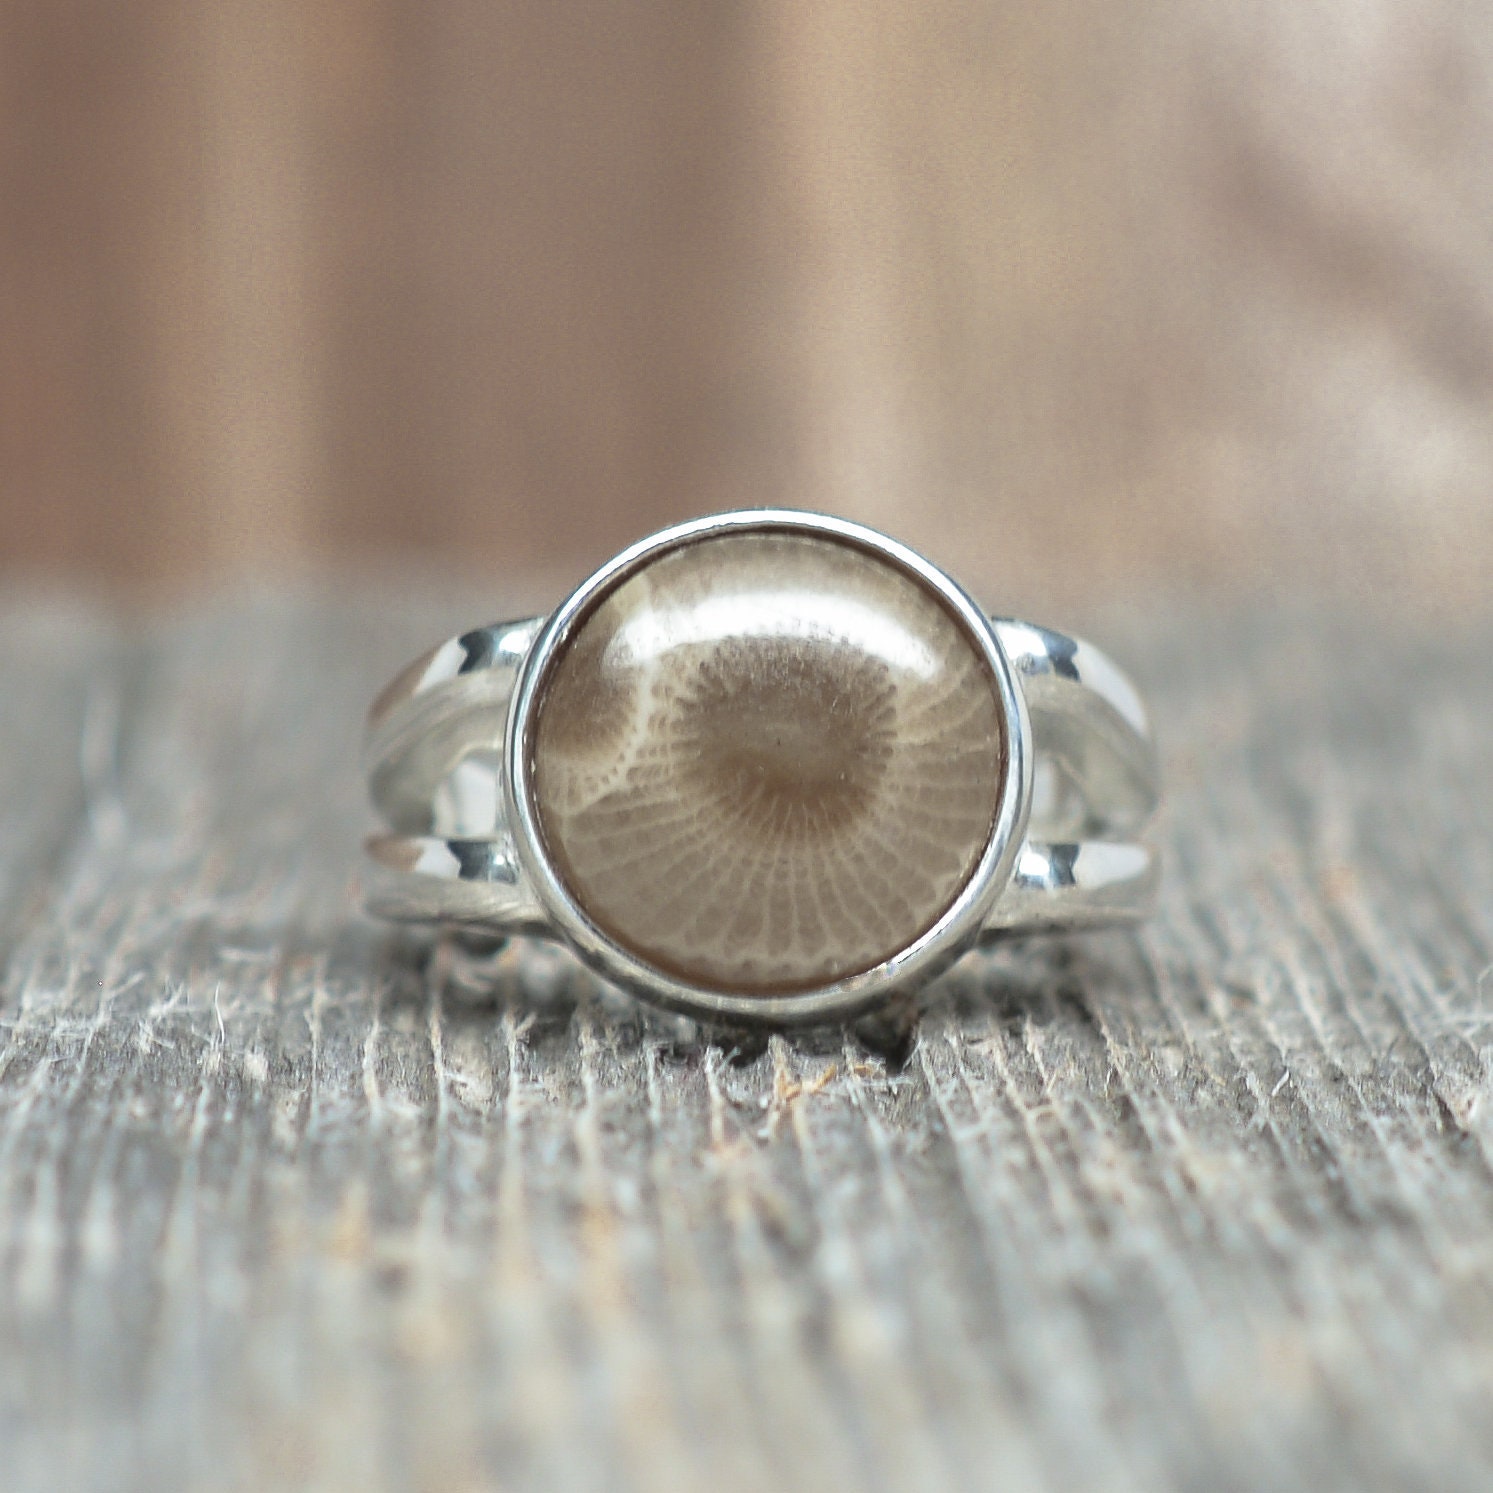 Petoskey Stone Ring Size 7 Sterling Silver 12mm Round